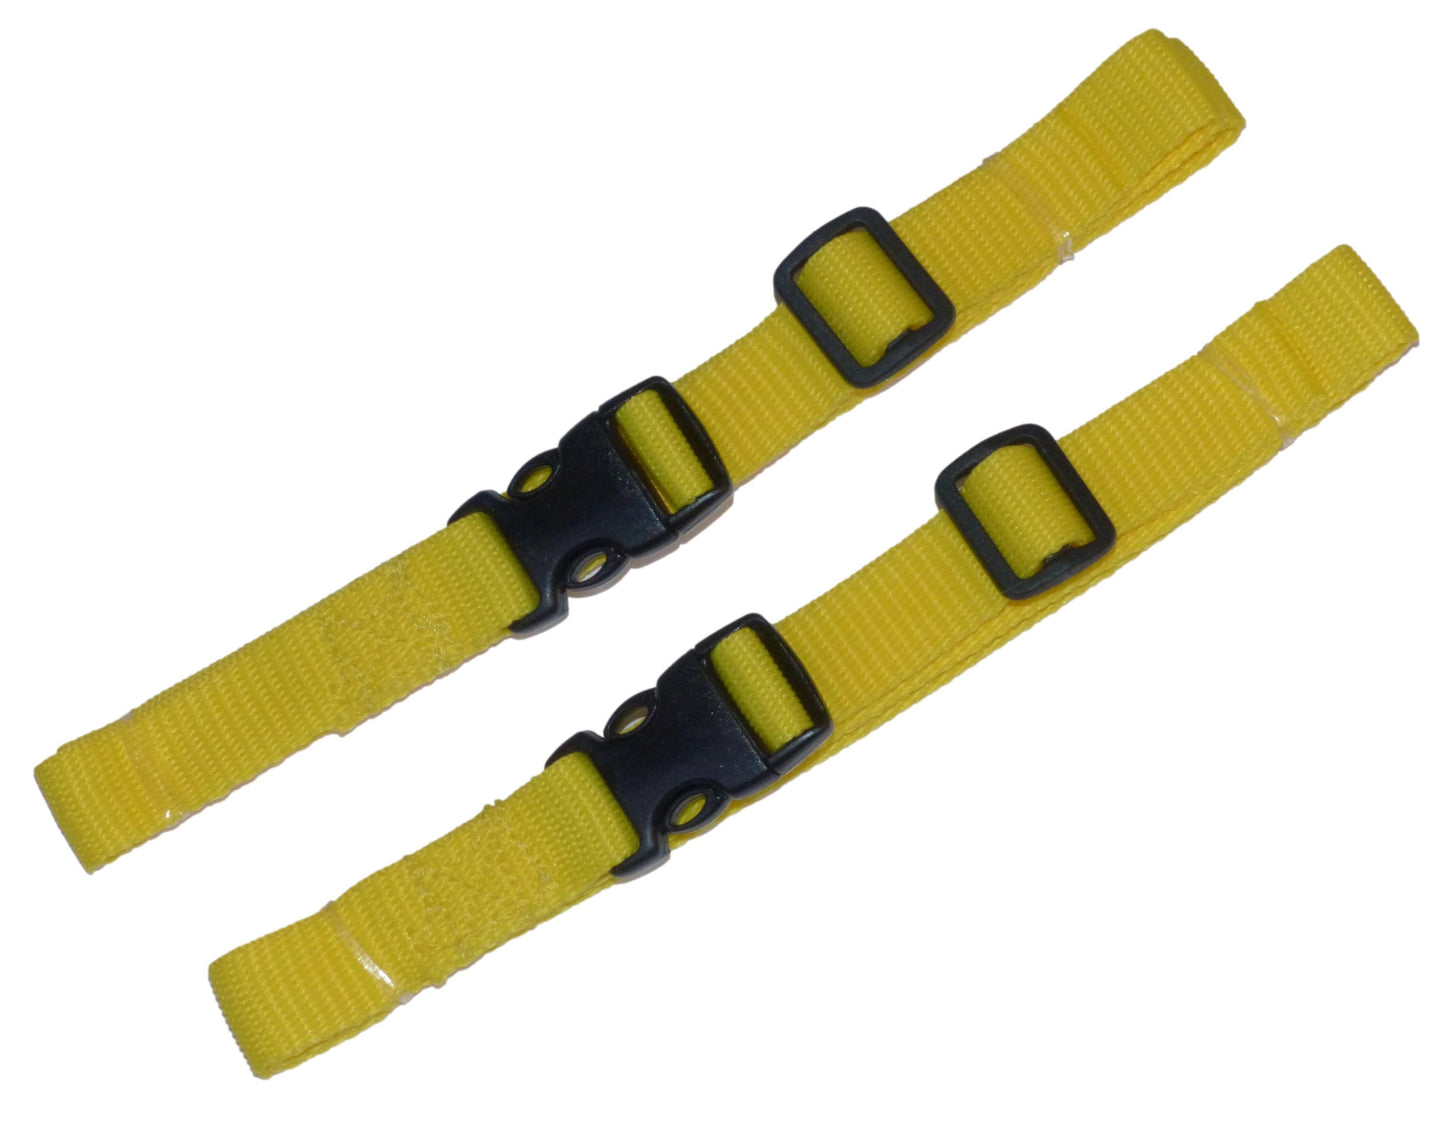 Benristraps 19mm Webbing Strap with Quick Release Buckle (Pair) in yellow (4)